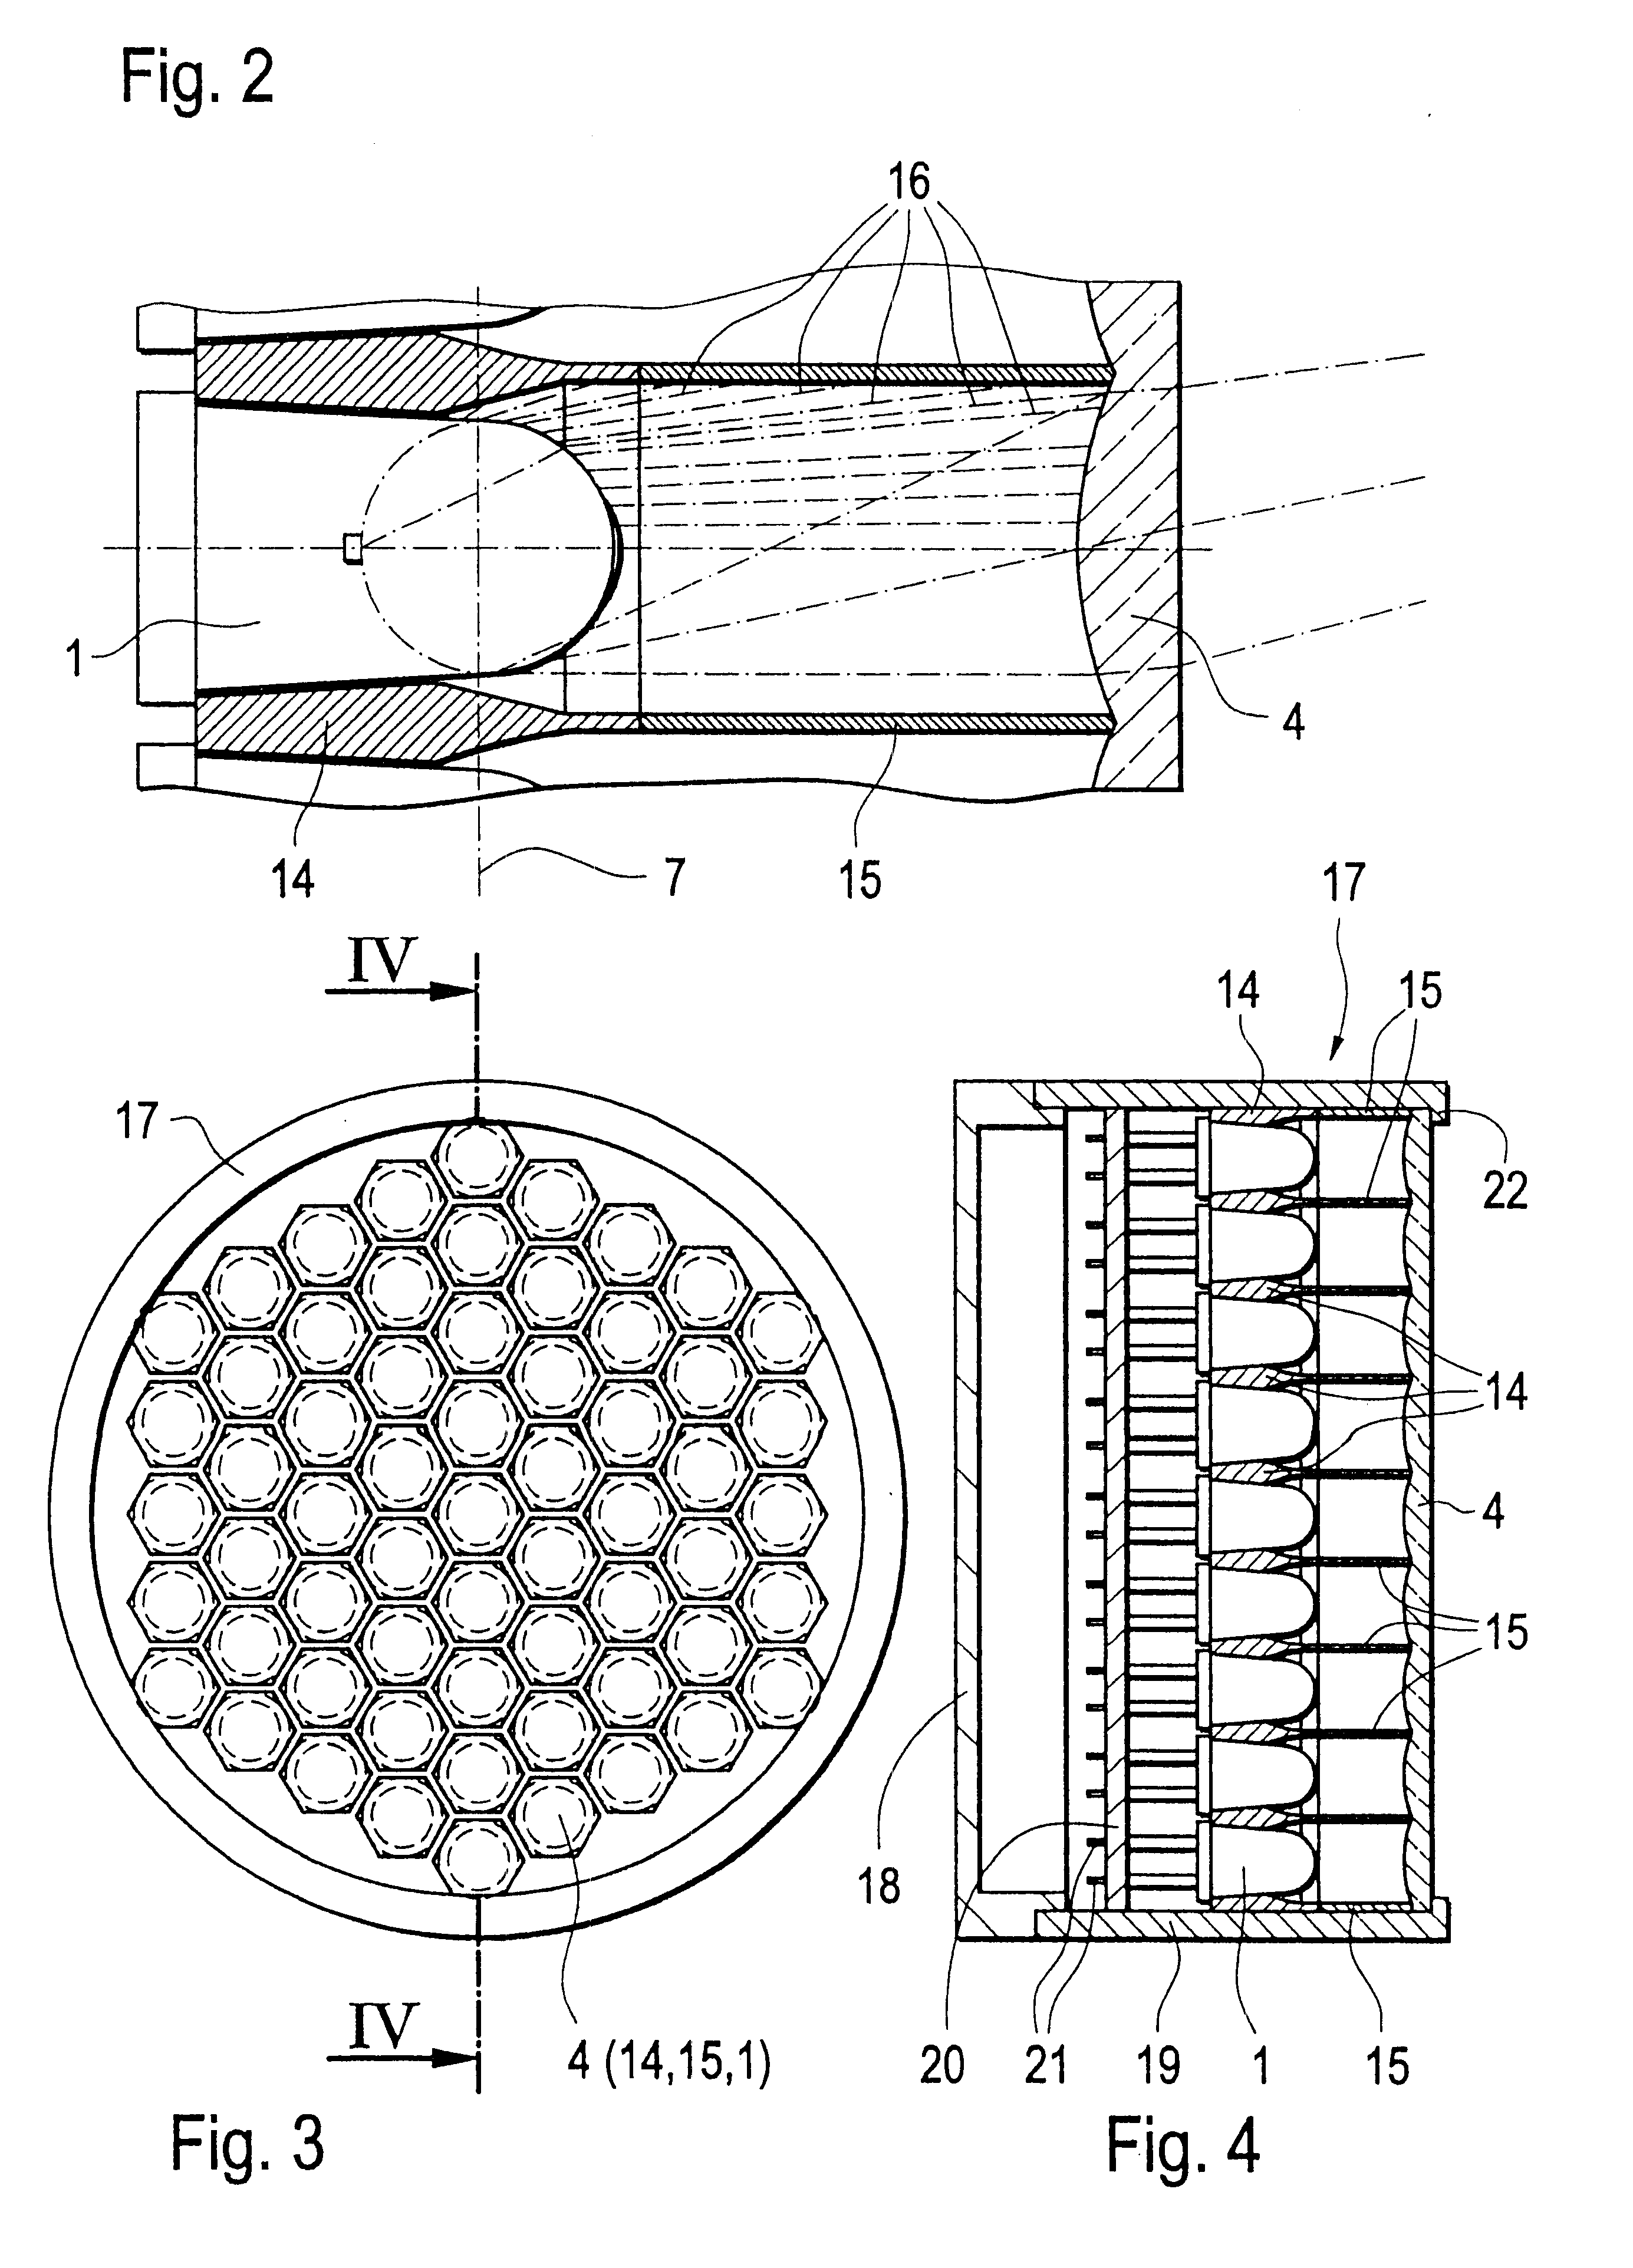 Apparatus for lighting spaces, bodies or surfaces